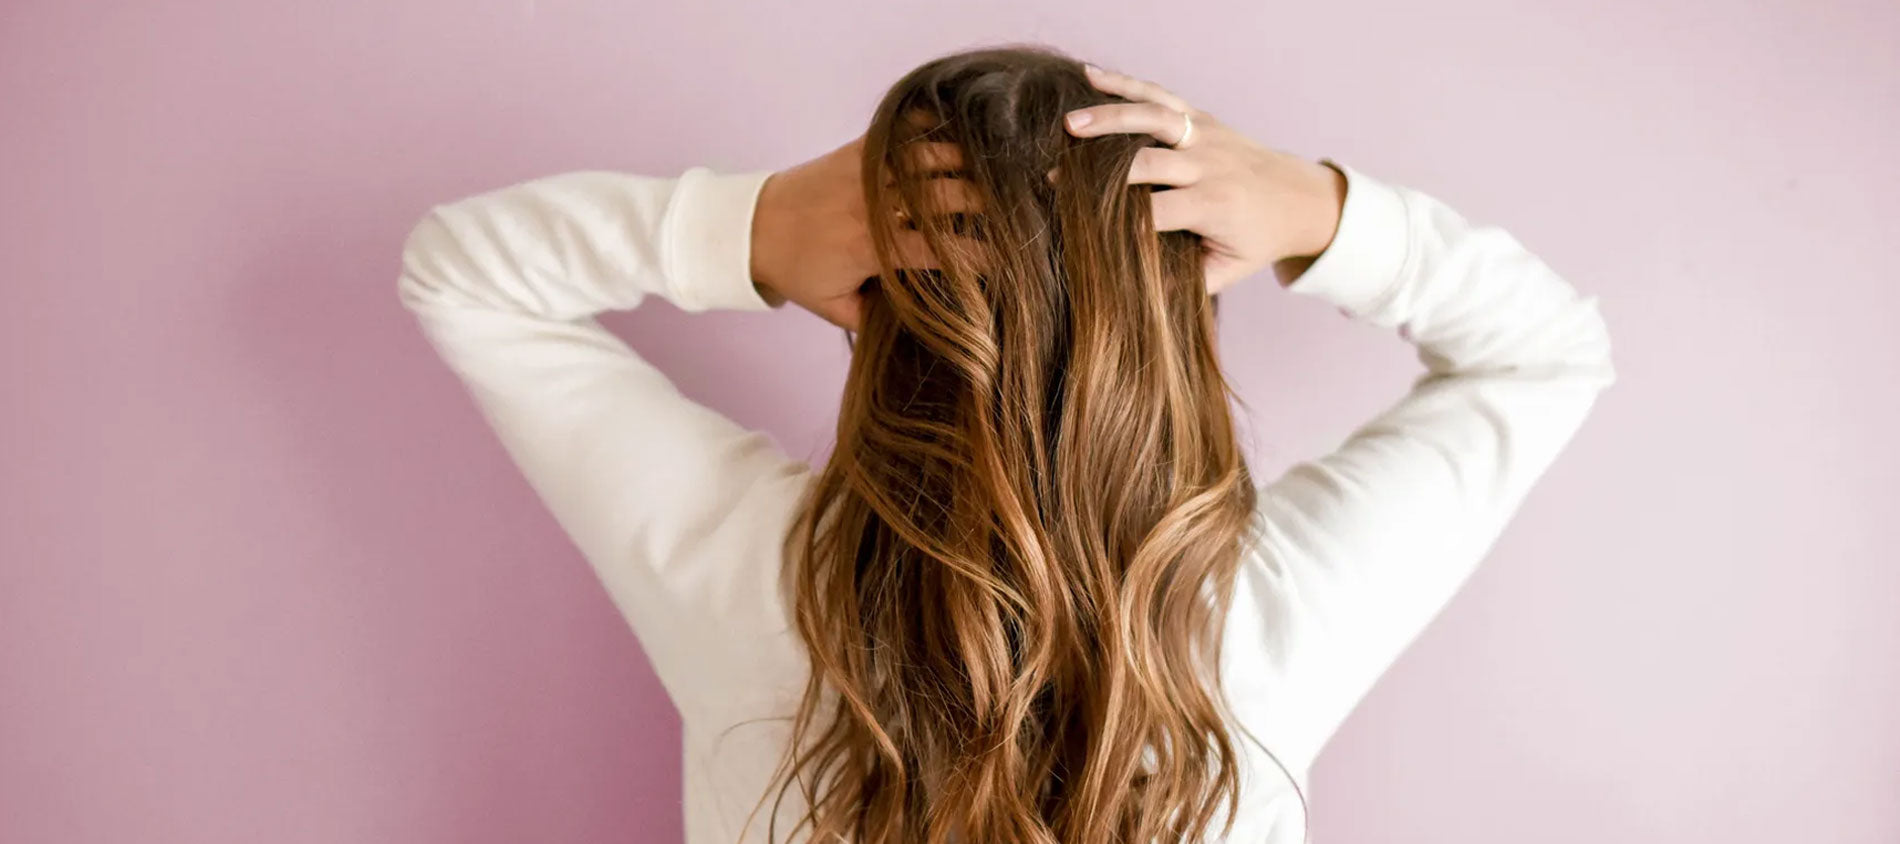 Woman holding hair pink background